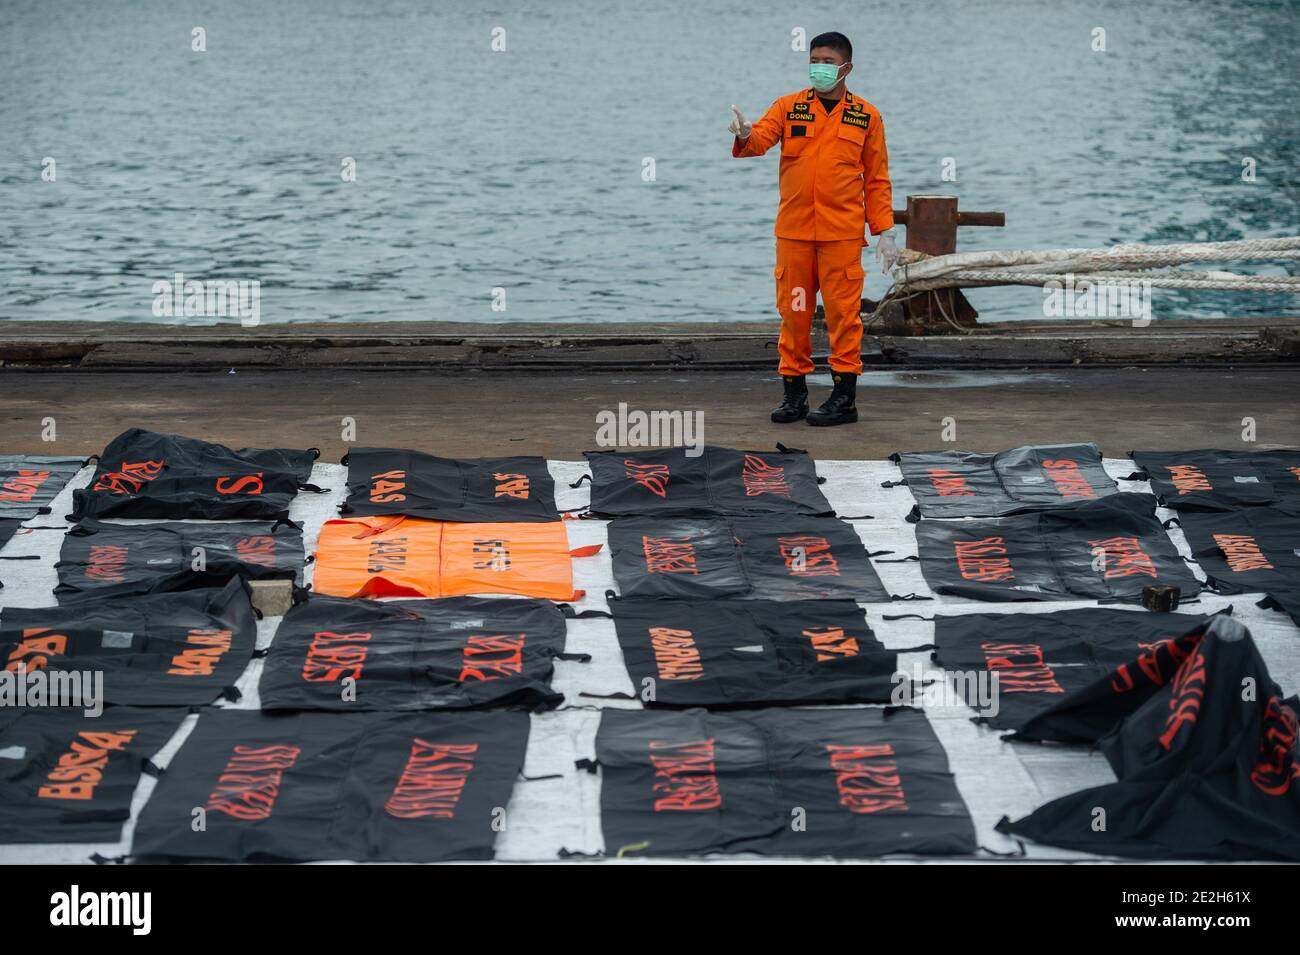 Jakarta, Indonesia. 14th Jan, 2021. A staff member counts bags containing body parts of the victims of the Sriwijaya Air plane crash at the Search and Rescue Command center at Tanjung Priok Port in Jakarta, Indonesia, Jan. 14, 2021. On Jan. 9, a Sriwijaya Air Boeing 737-500 plane with 62 people aboard lost contact minutes after takeoff and crashed into waters off the coast of Indonesia's capital Jakarta. Credit: Veri Sanovri/Xinhua/Alamy Live News Stock Photo